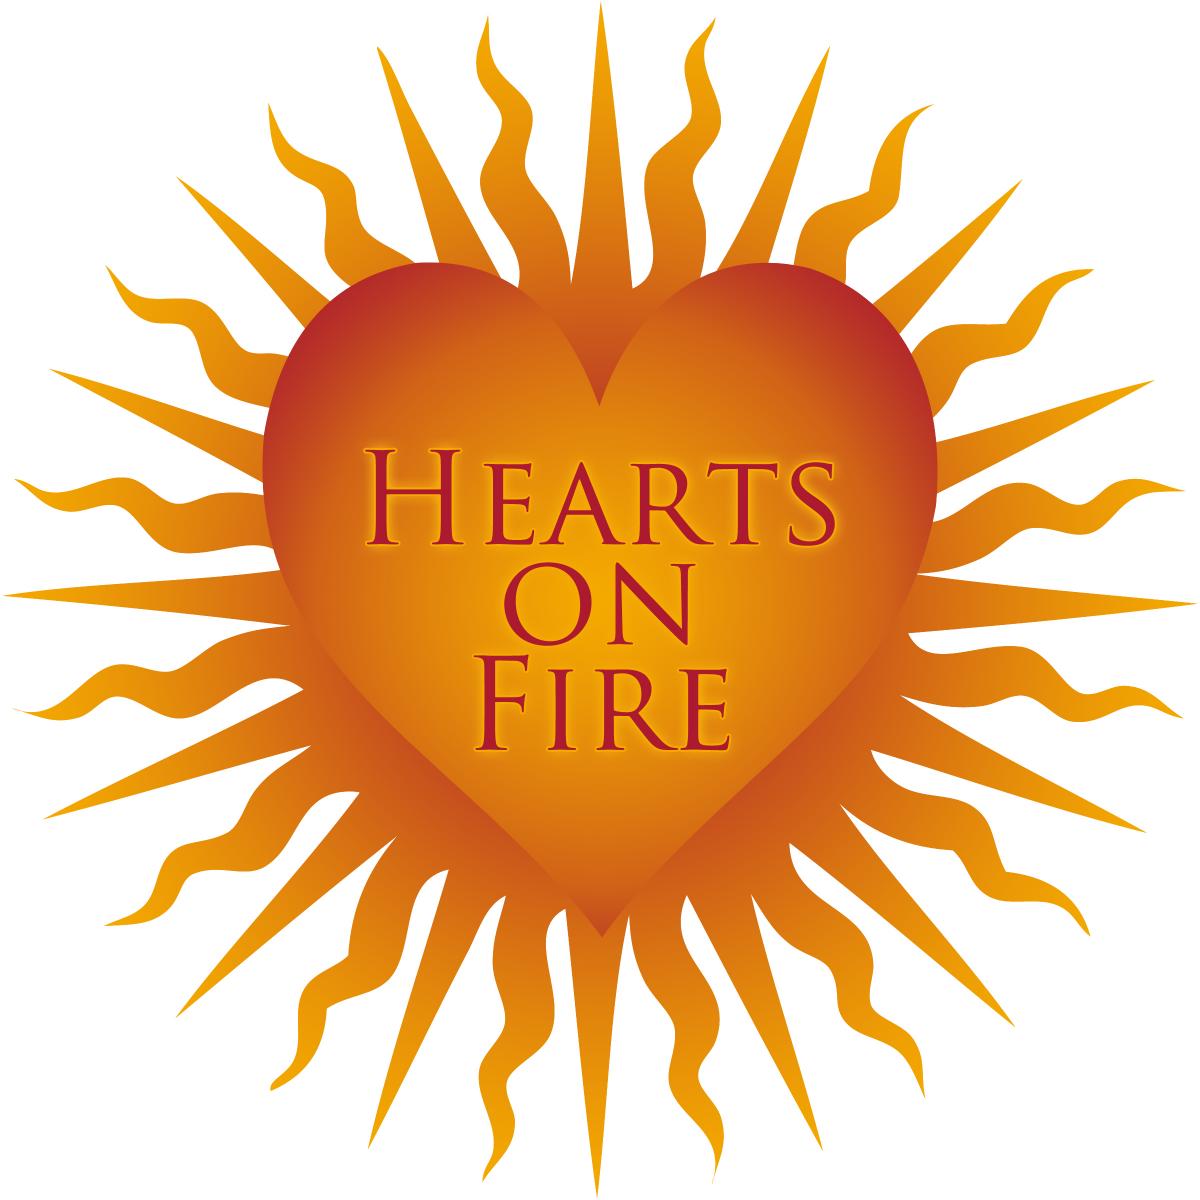 Hearts on Fire - Praying with the Jesuits in Lent - Jesuit High School